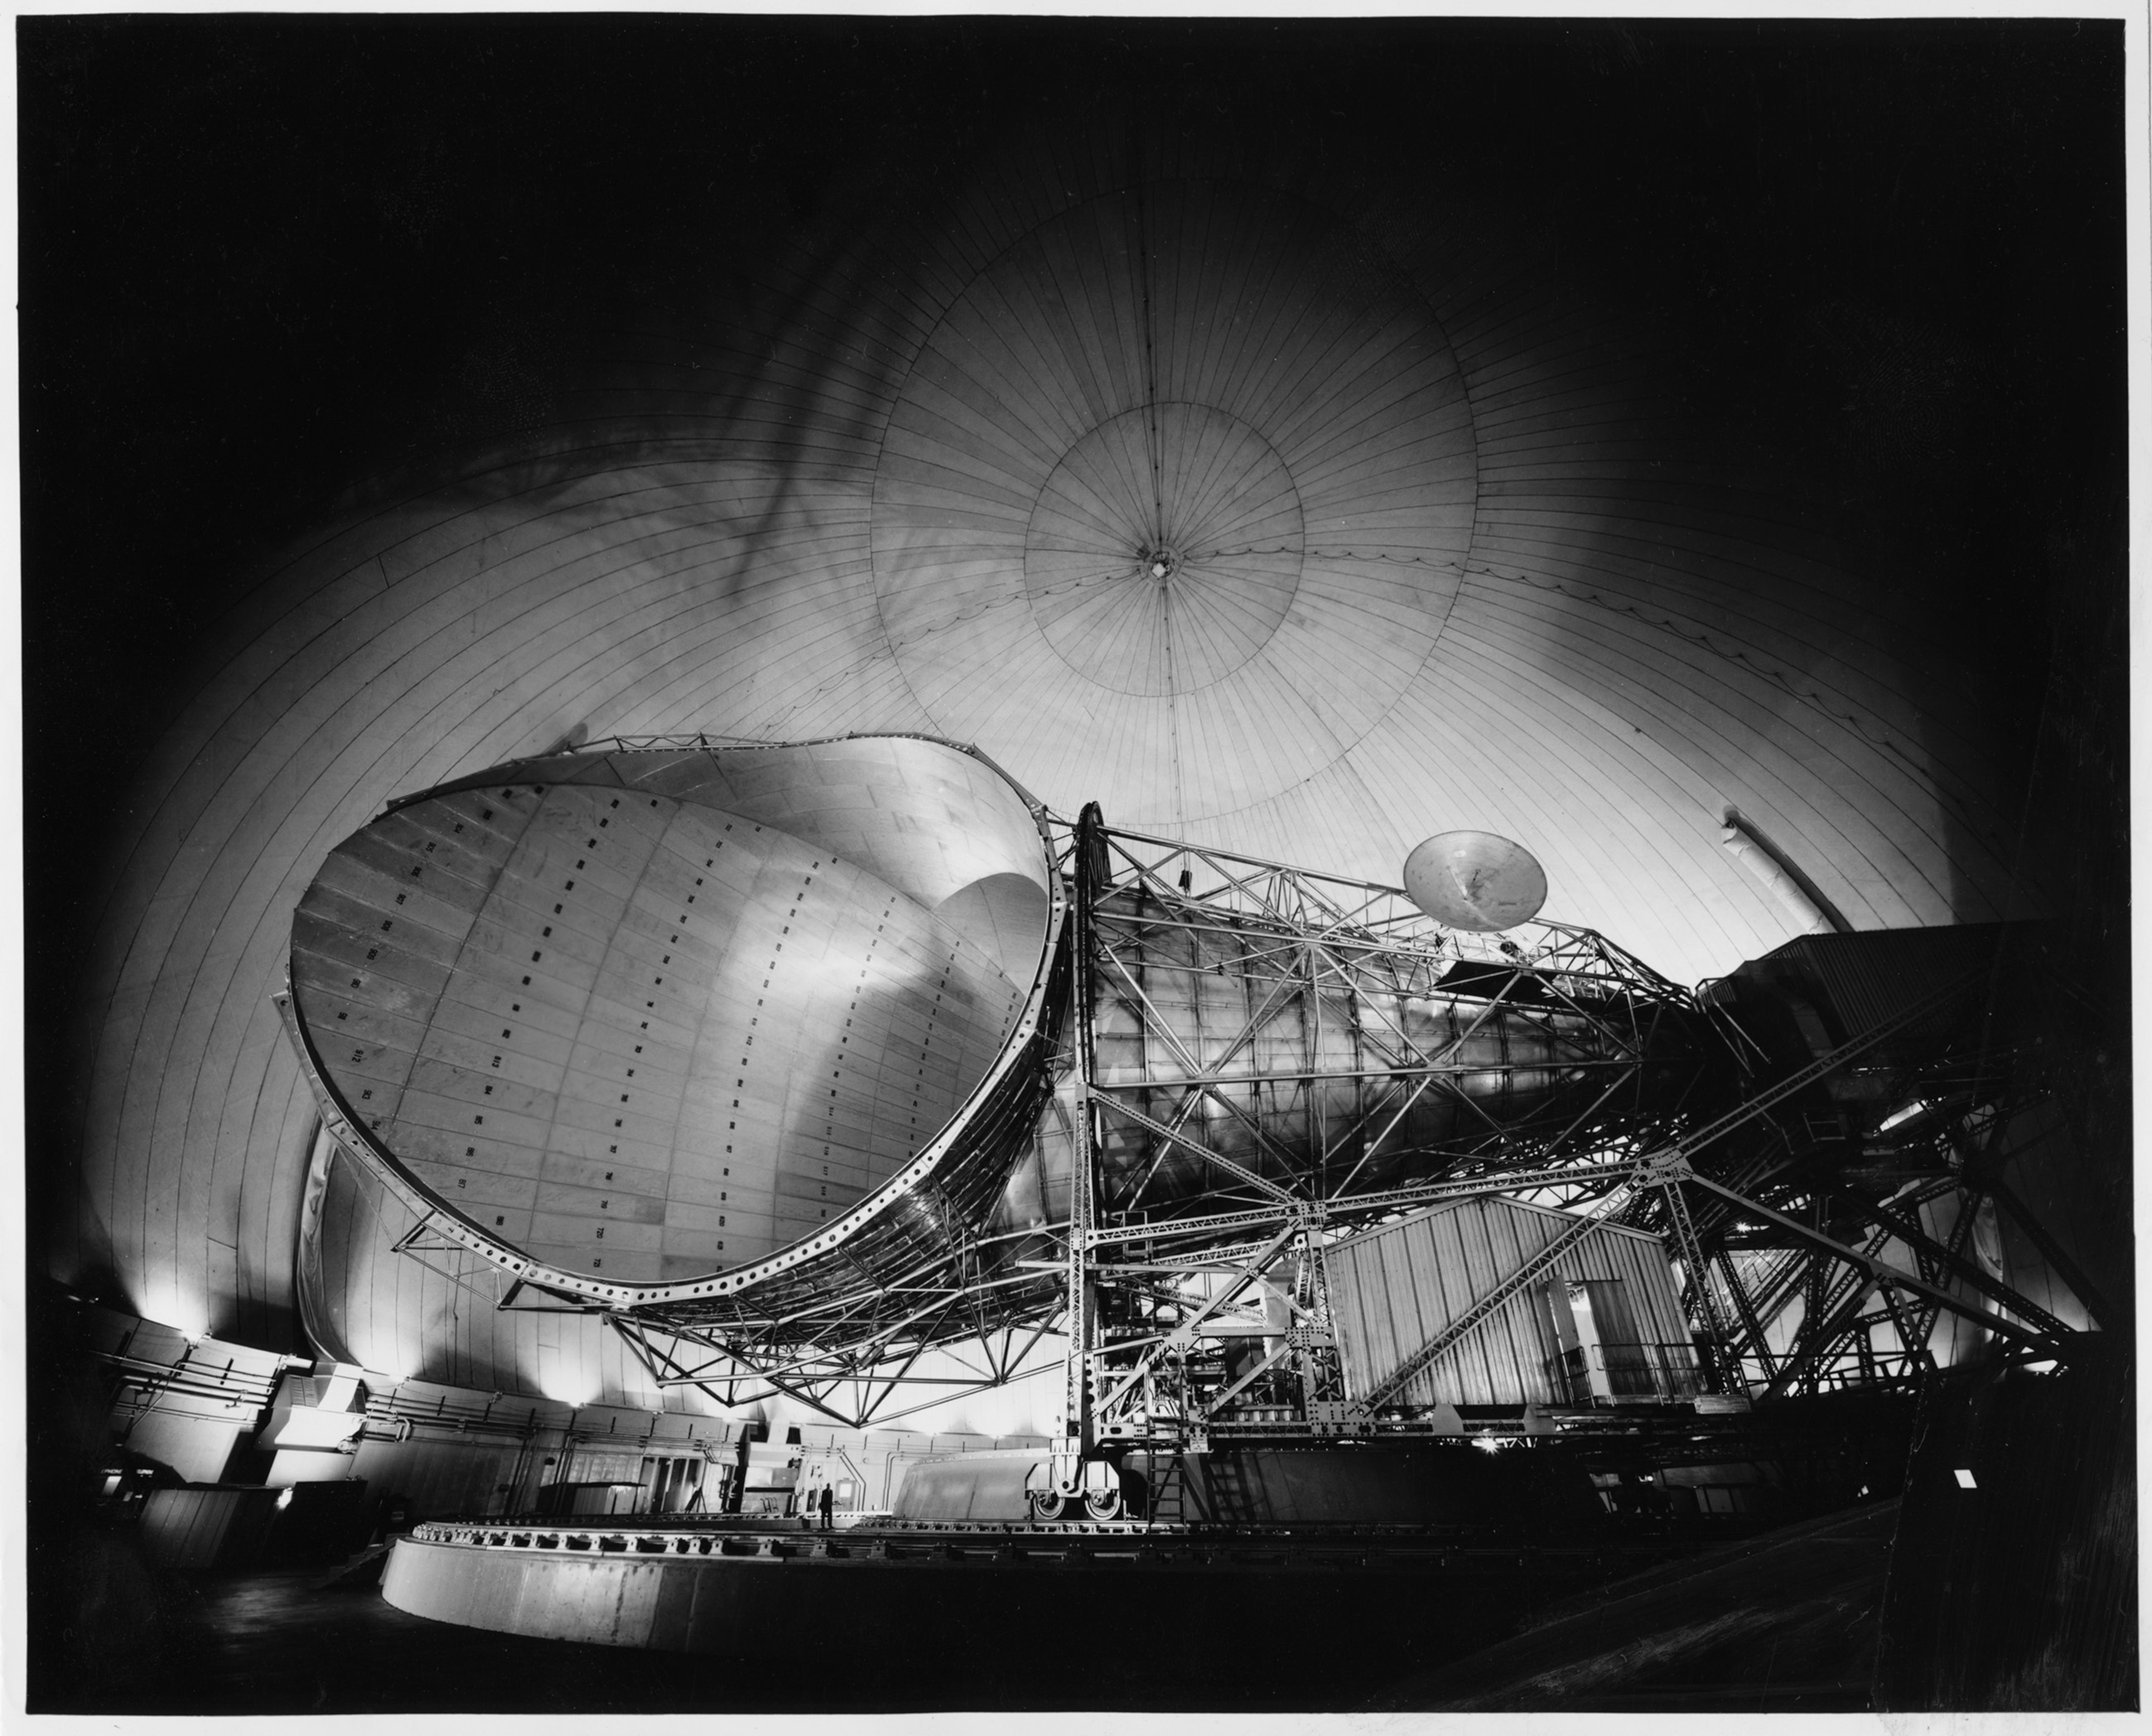 The big horn antennaweighing 380 tons, at the earth station at Andover, Maine […], 30.3.1965Silbergelatinepapier© Sammlung Idylle + Desaster, Bogomir Ecker